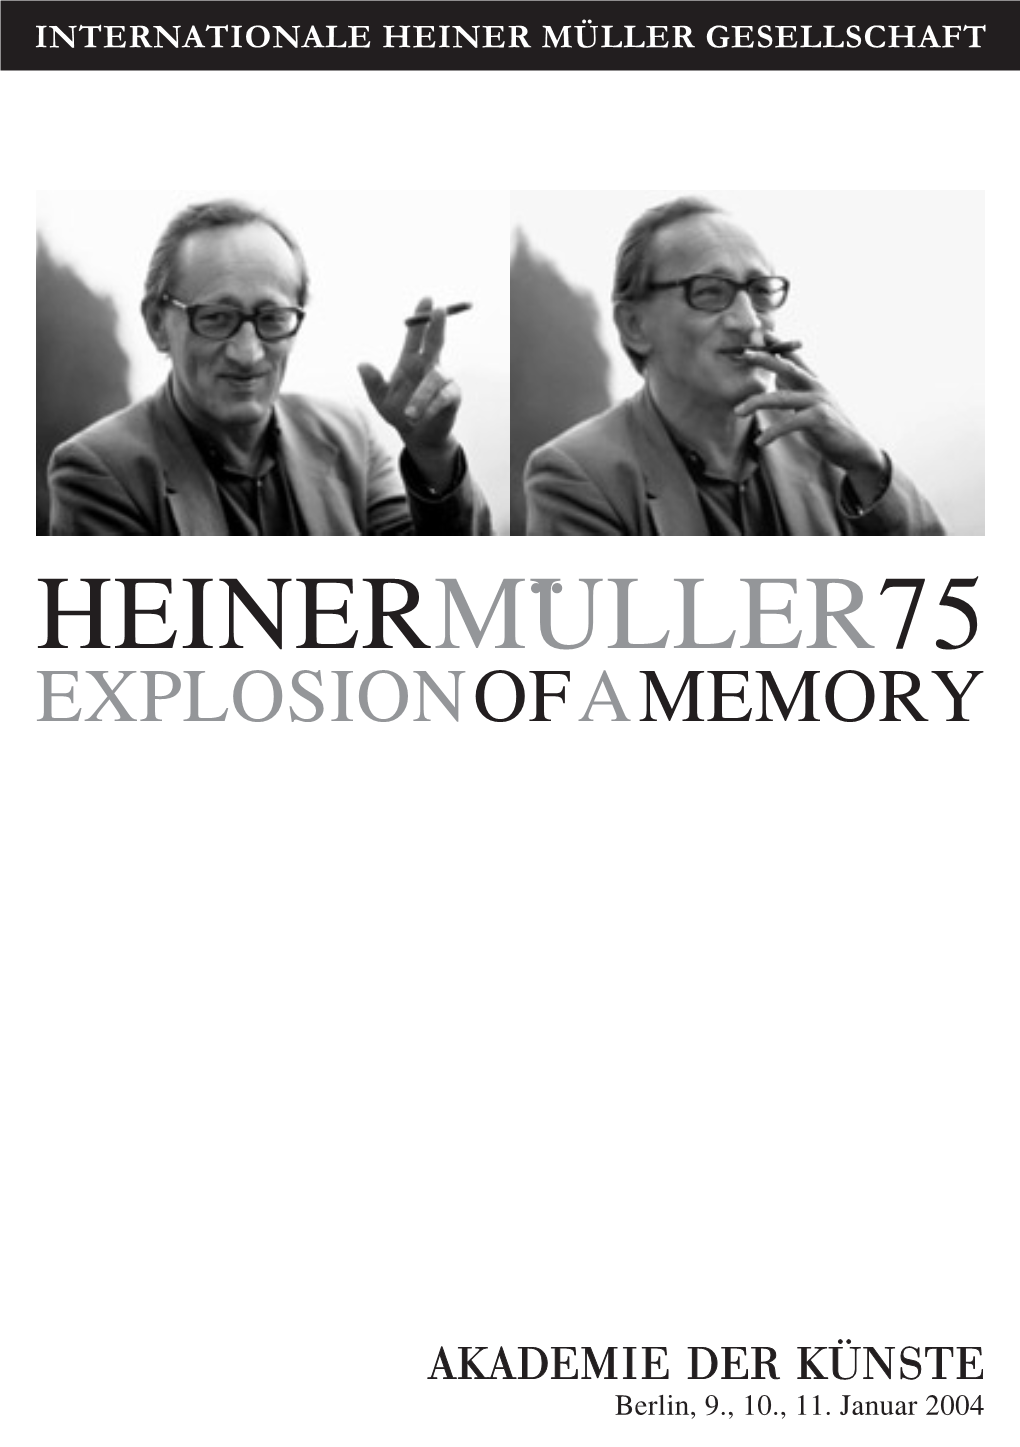 Heinermüller75 Explosion of a Memory